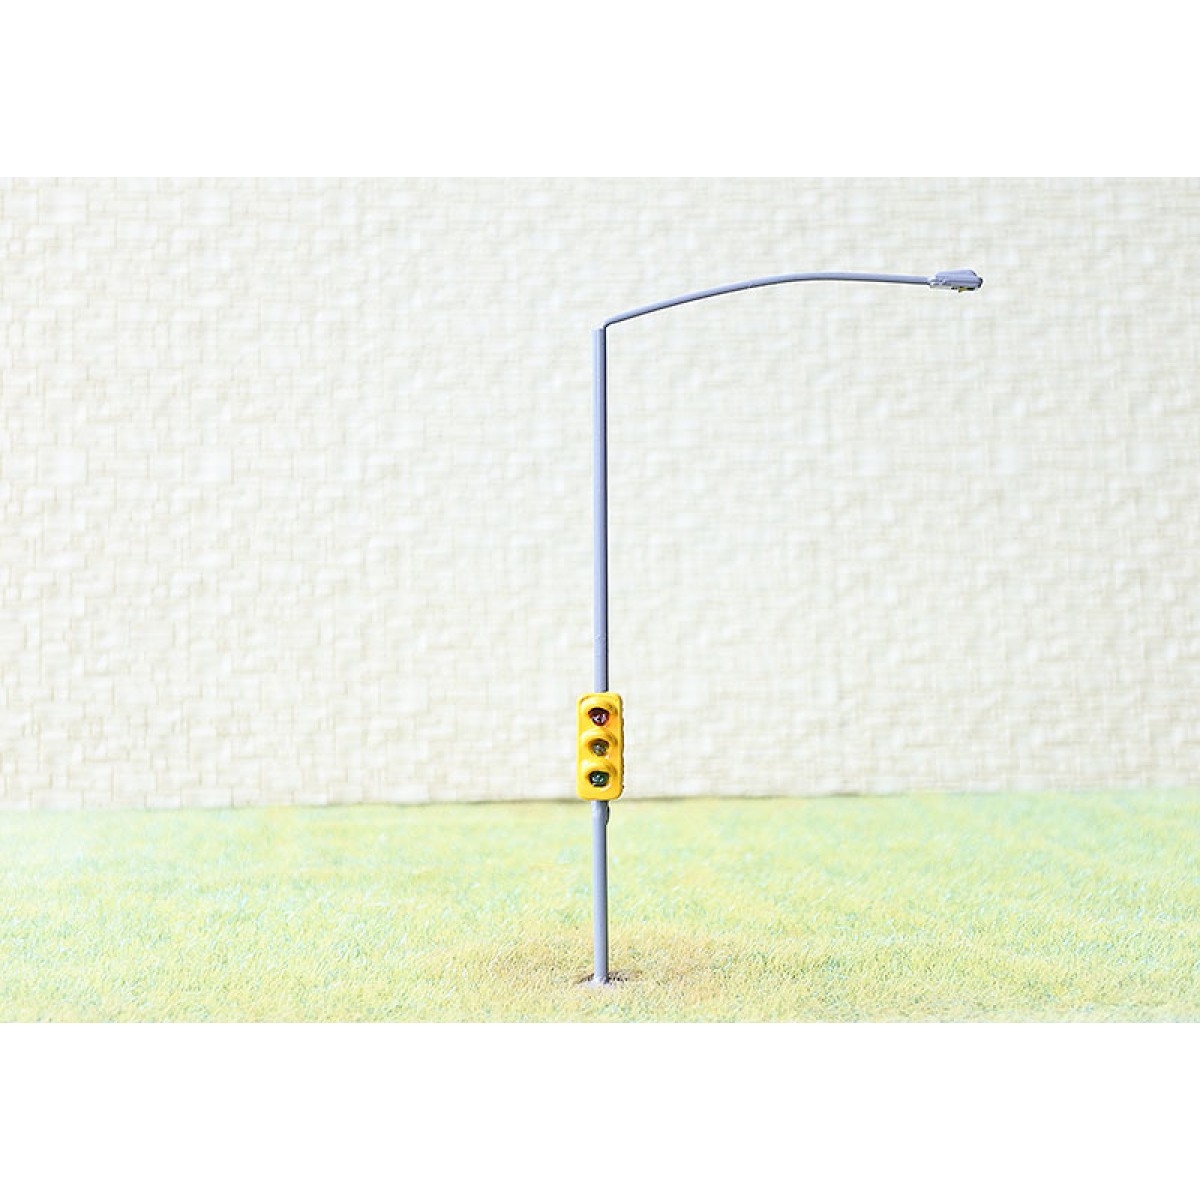 1 x traffic signal with street light HO OO scale model railroad led lamps #colGO